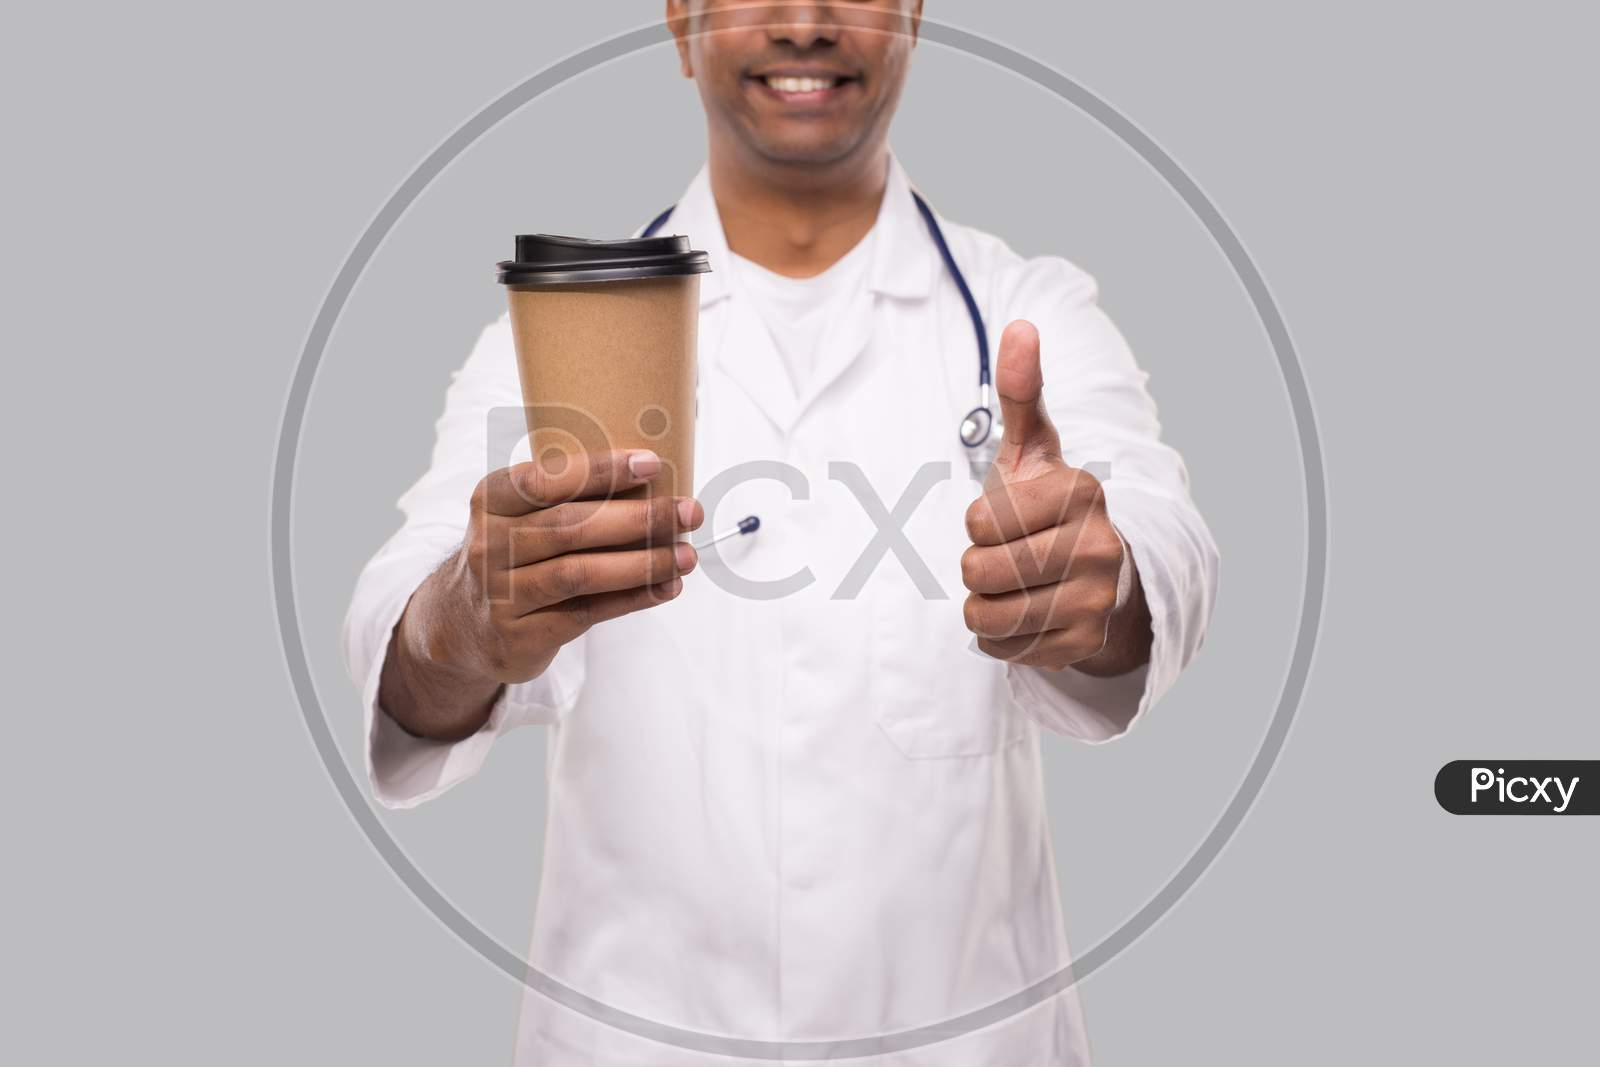 Man Doctor Holding Coffee Take Away Cup Smiling Close Up Isolated. Indian Doctor Holding Coffee To Go Cup.